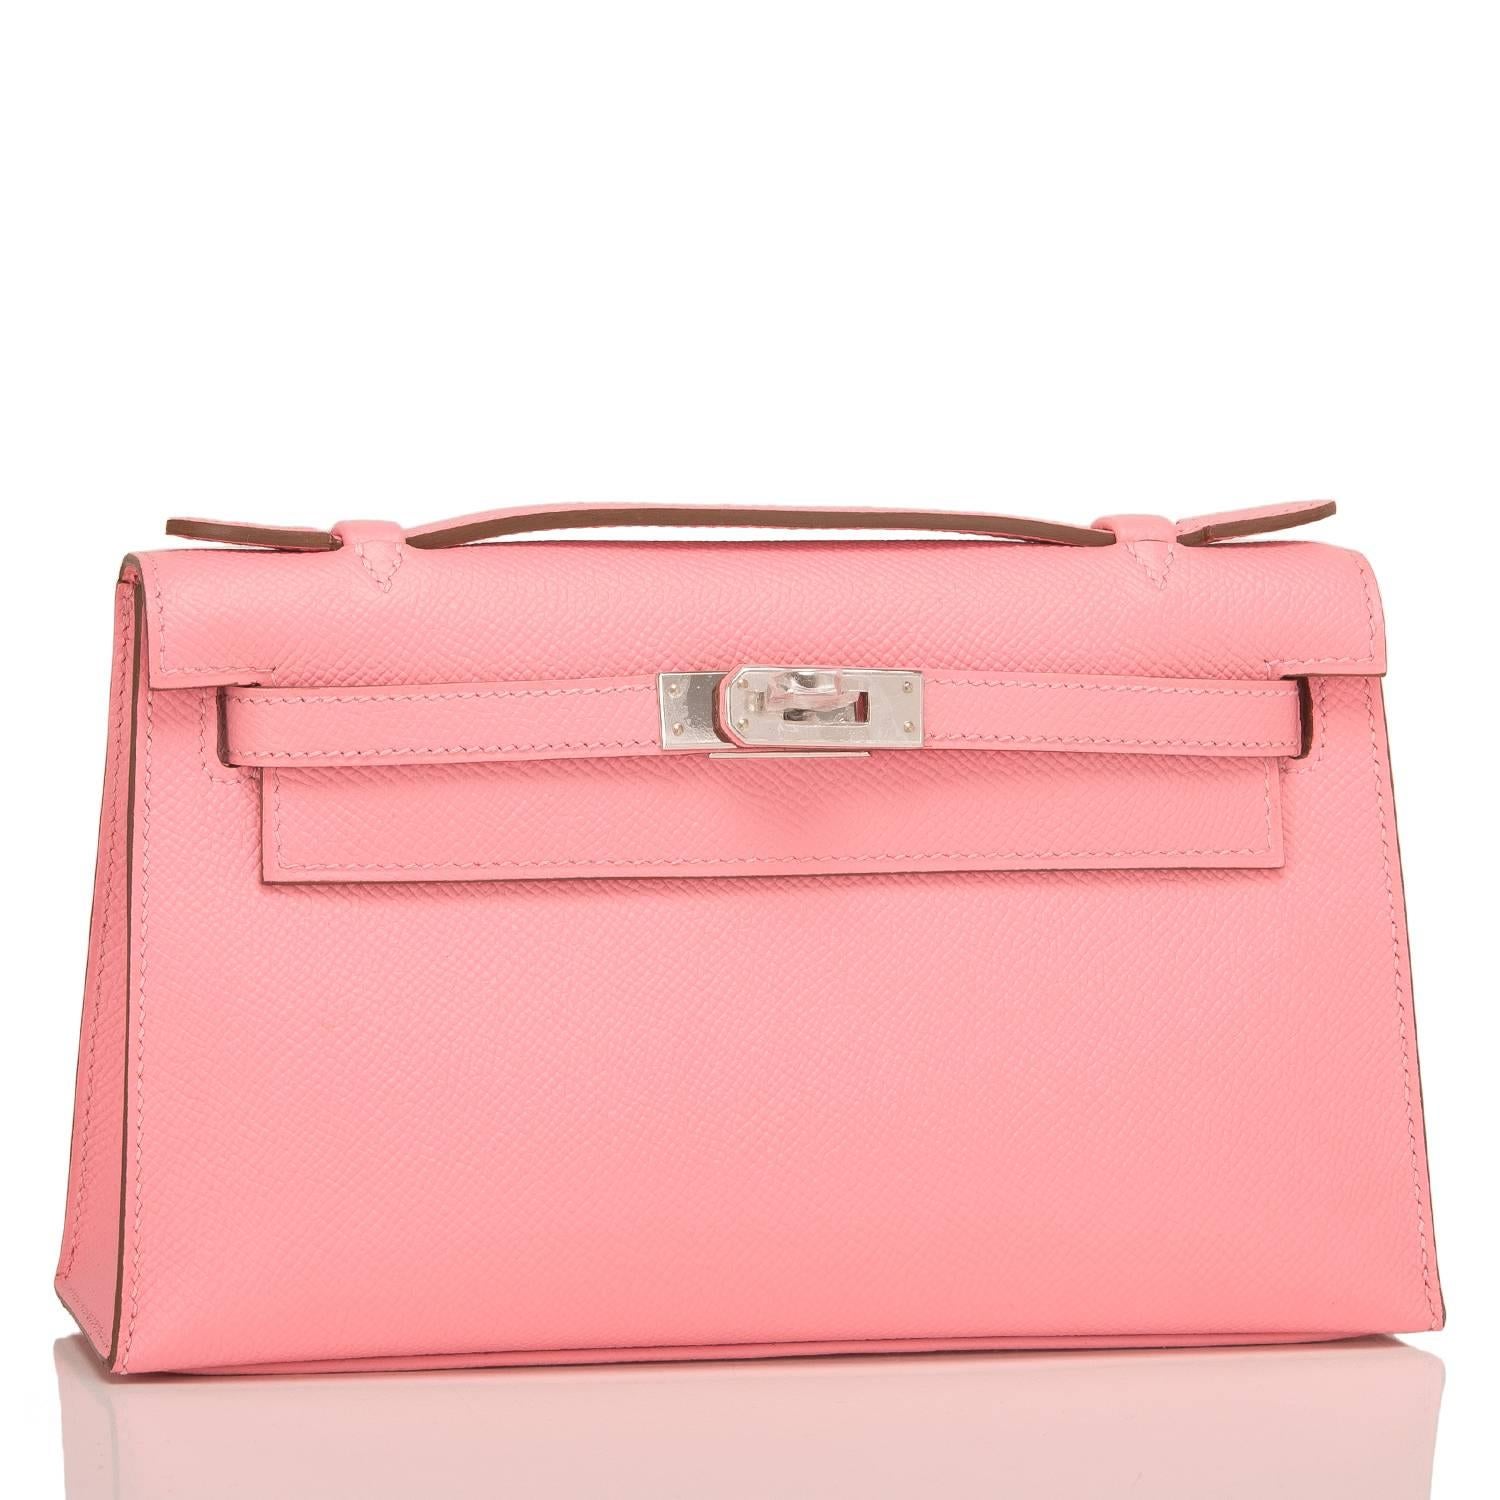 Hermes Rose Confetti Mini Kelly Pochette of epsom leather with palladium hardware.

This Hermes Kelly Pochette has tonal stitching, a front flap with two straps, a toggle closure and a single flat handle.

The interior is lined with rose